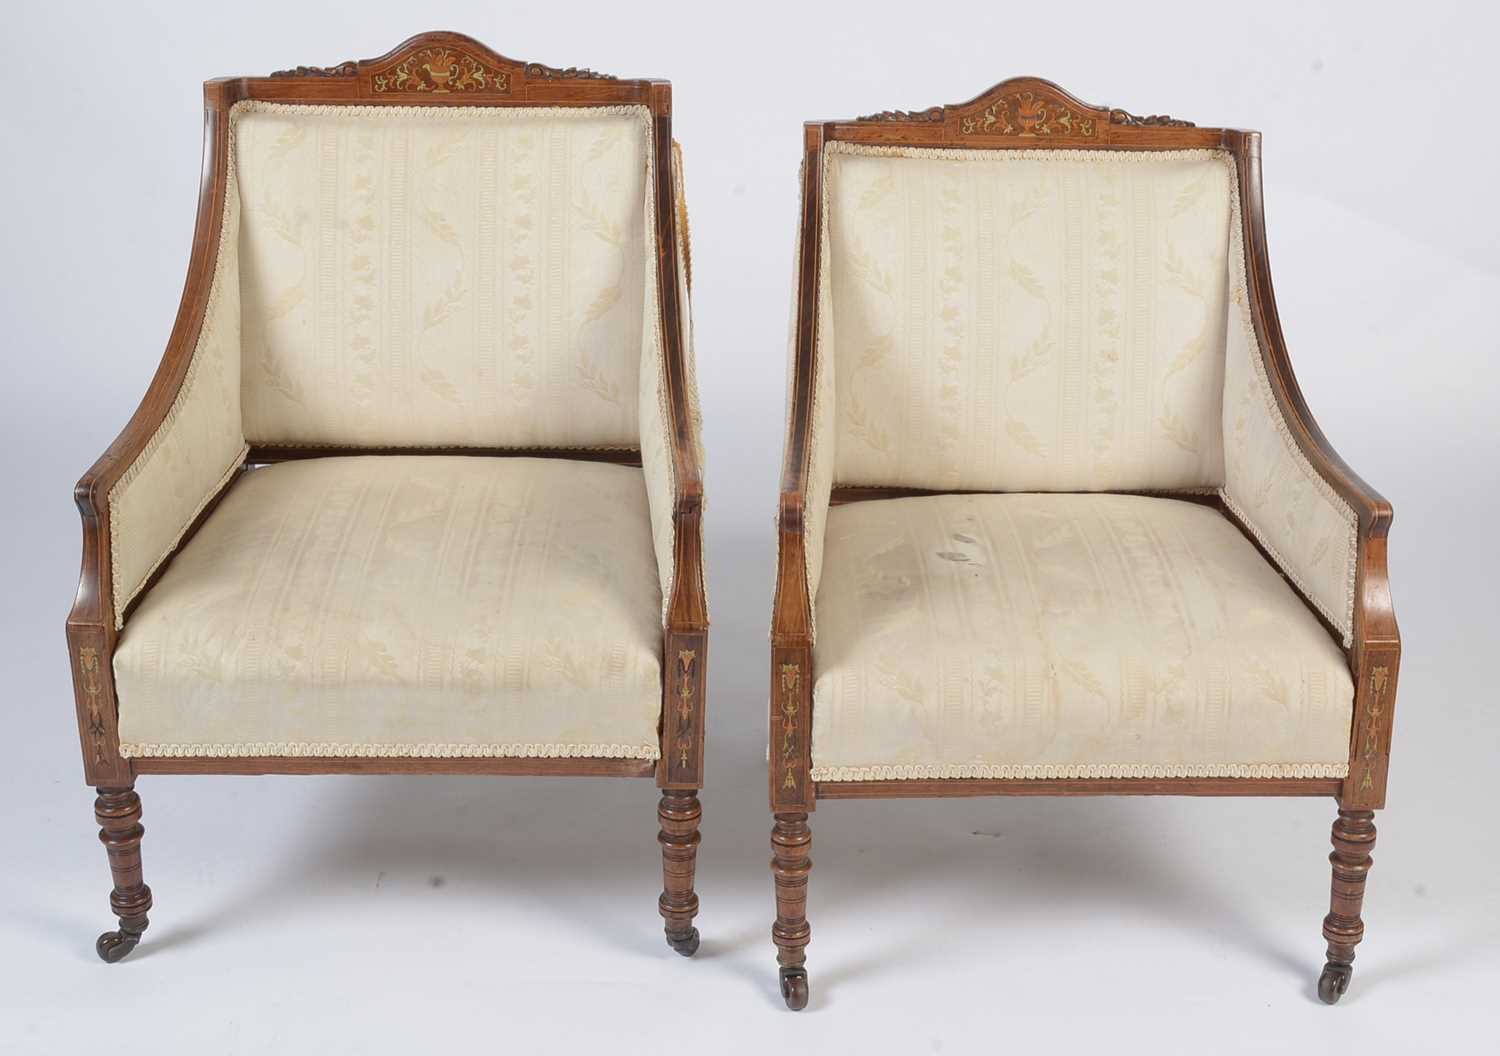 Two Edwardian inlaid rosewood easy chairs - Image 13 of 13